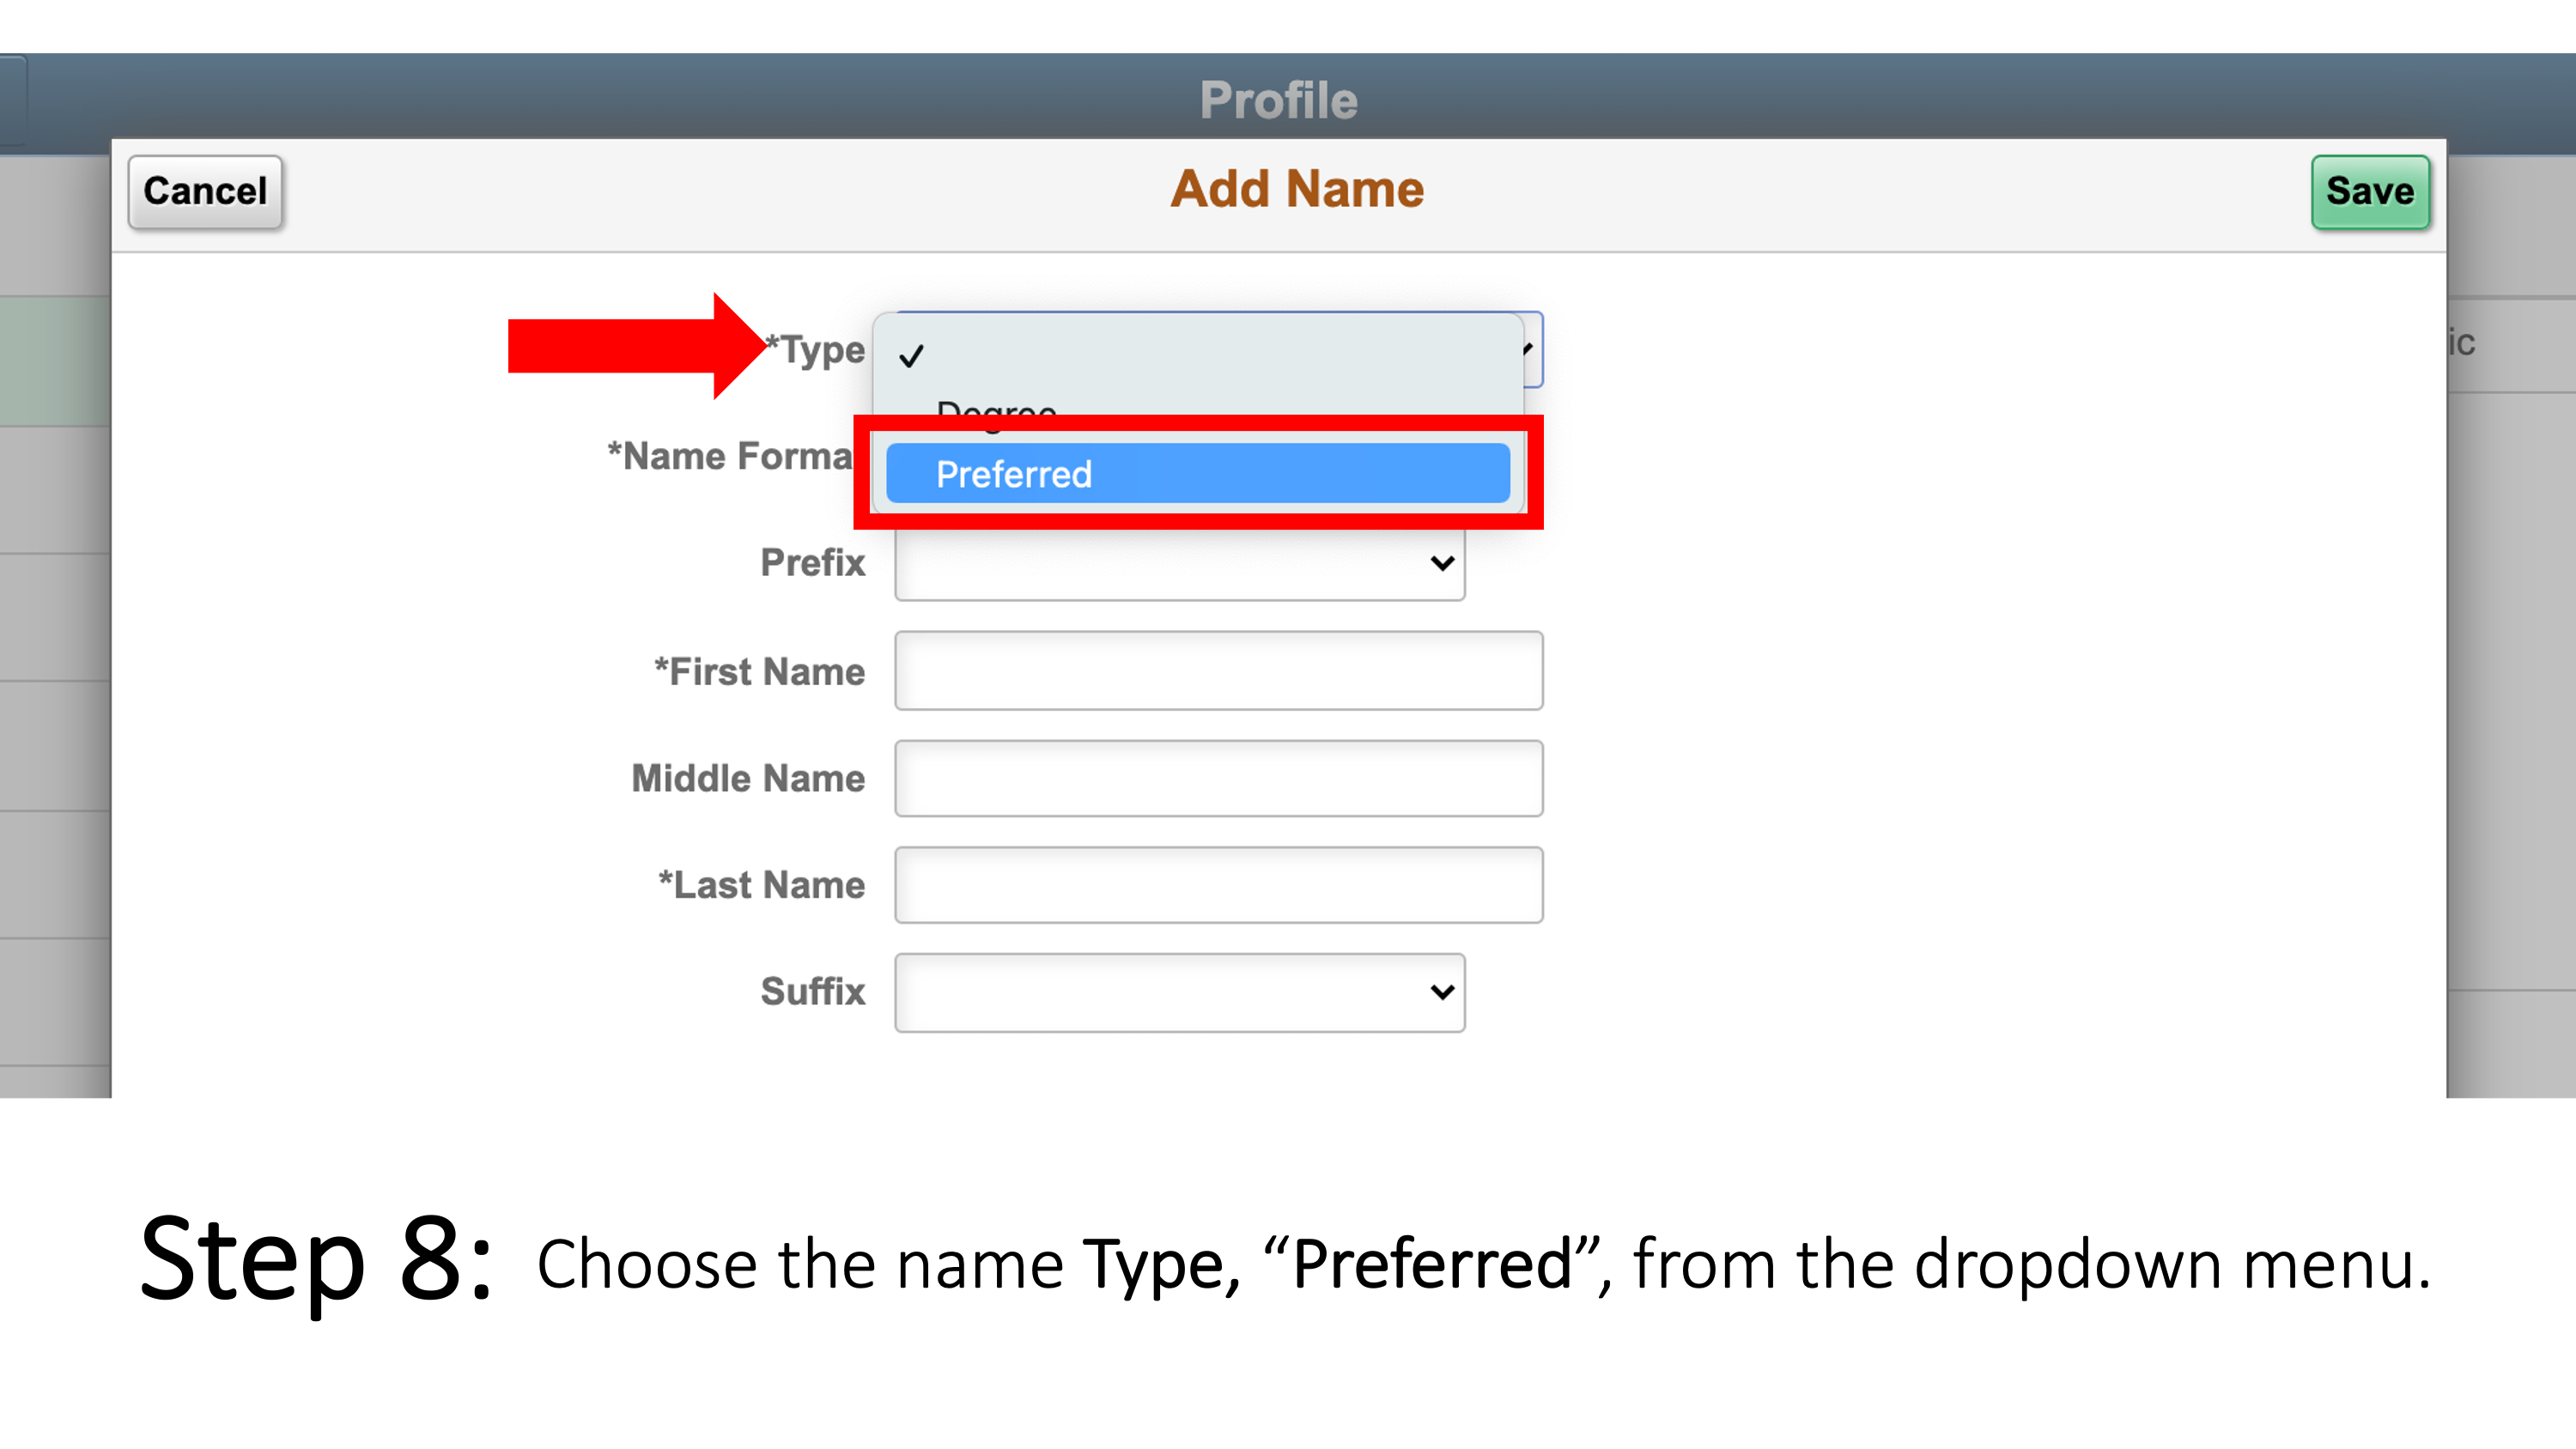 Choose the name Type, “Preferred”, from the dropdown menu.